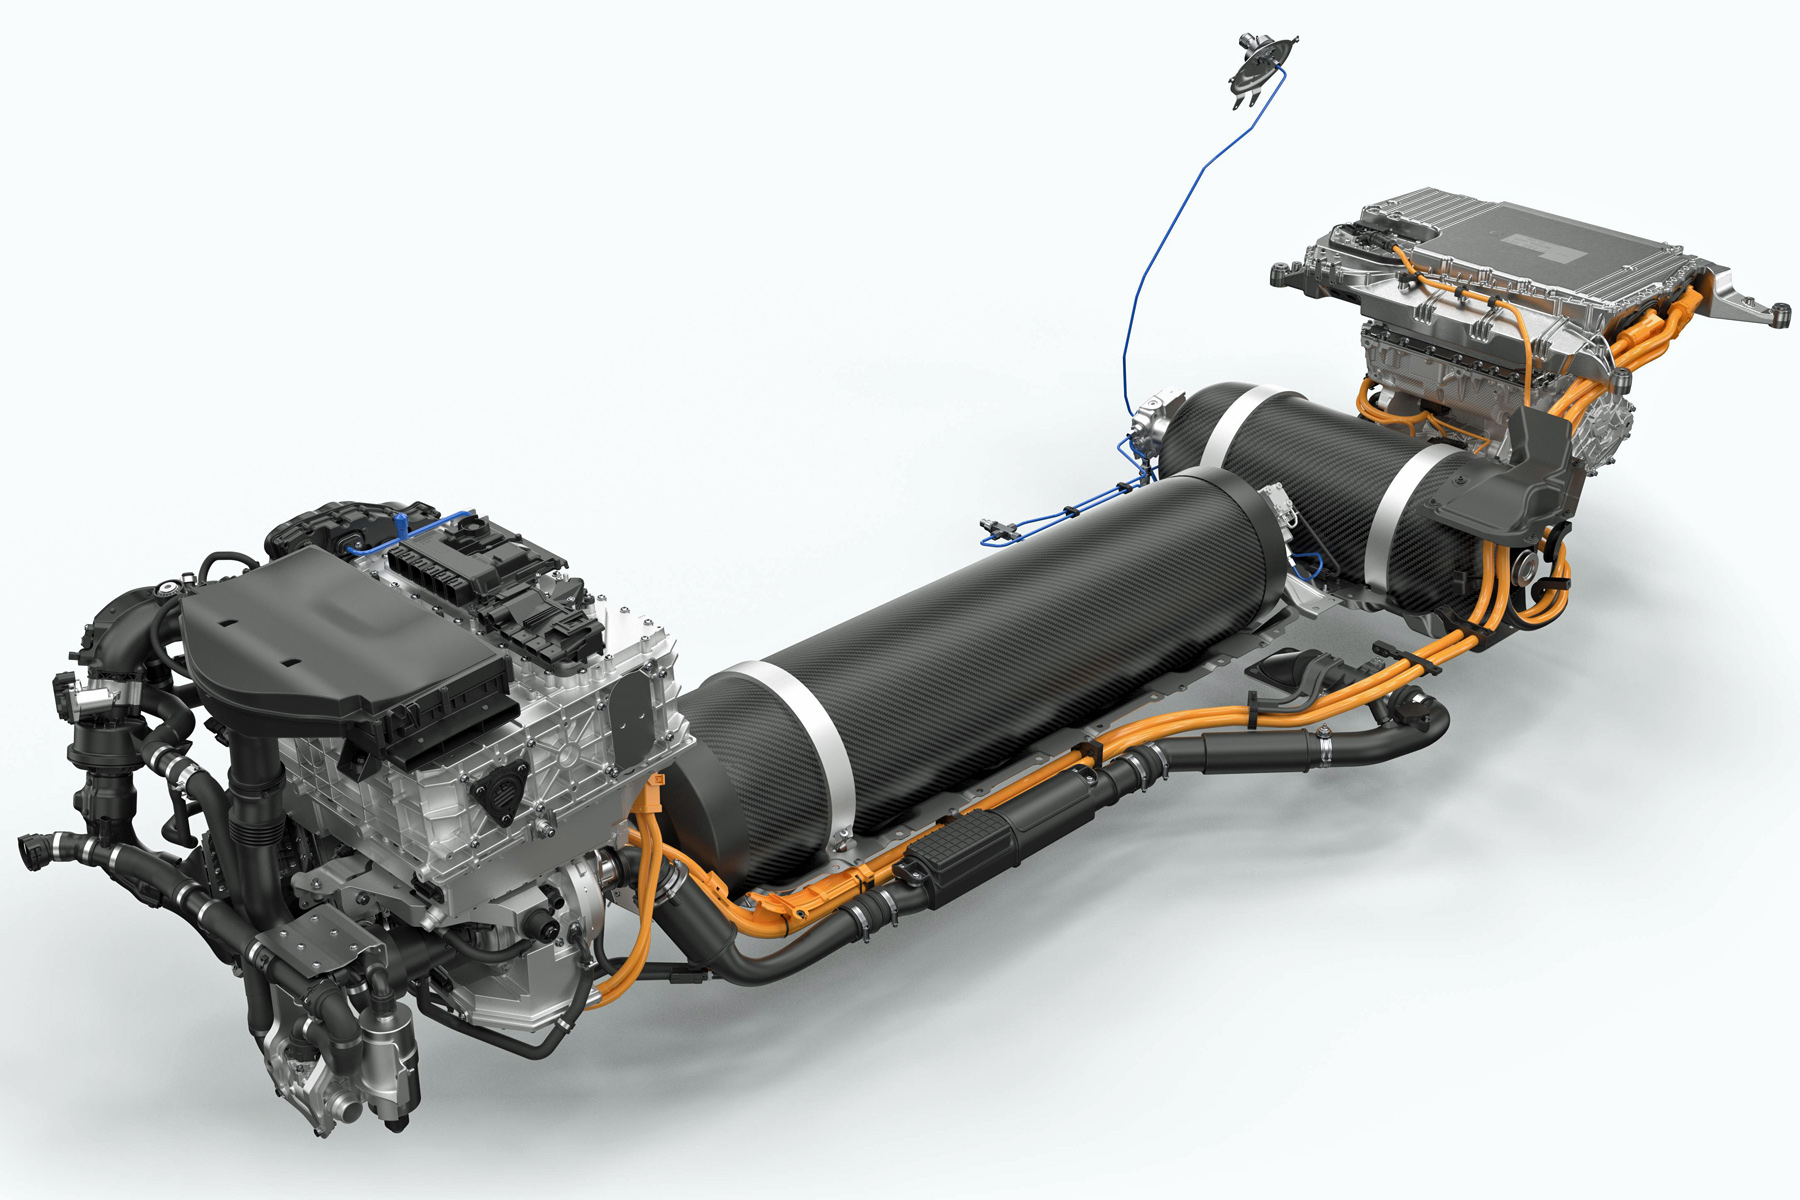 BMW fuel cell system